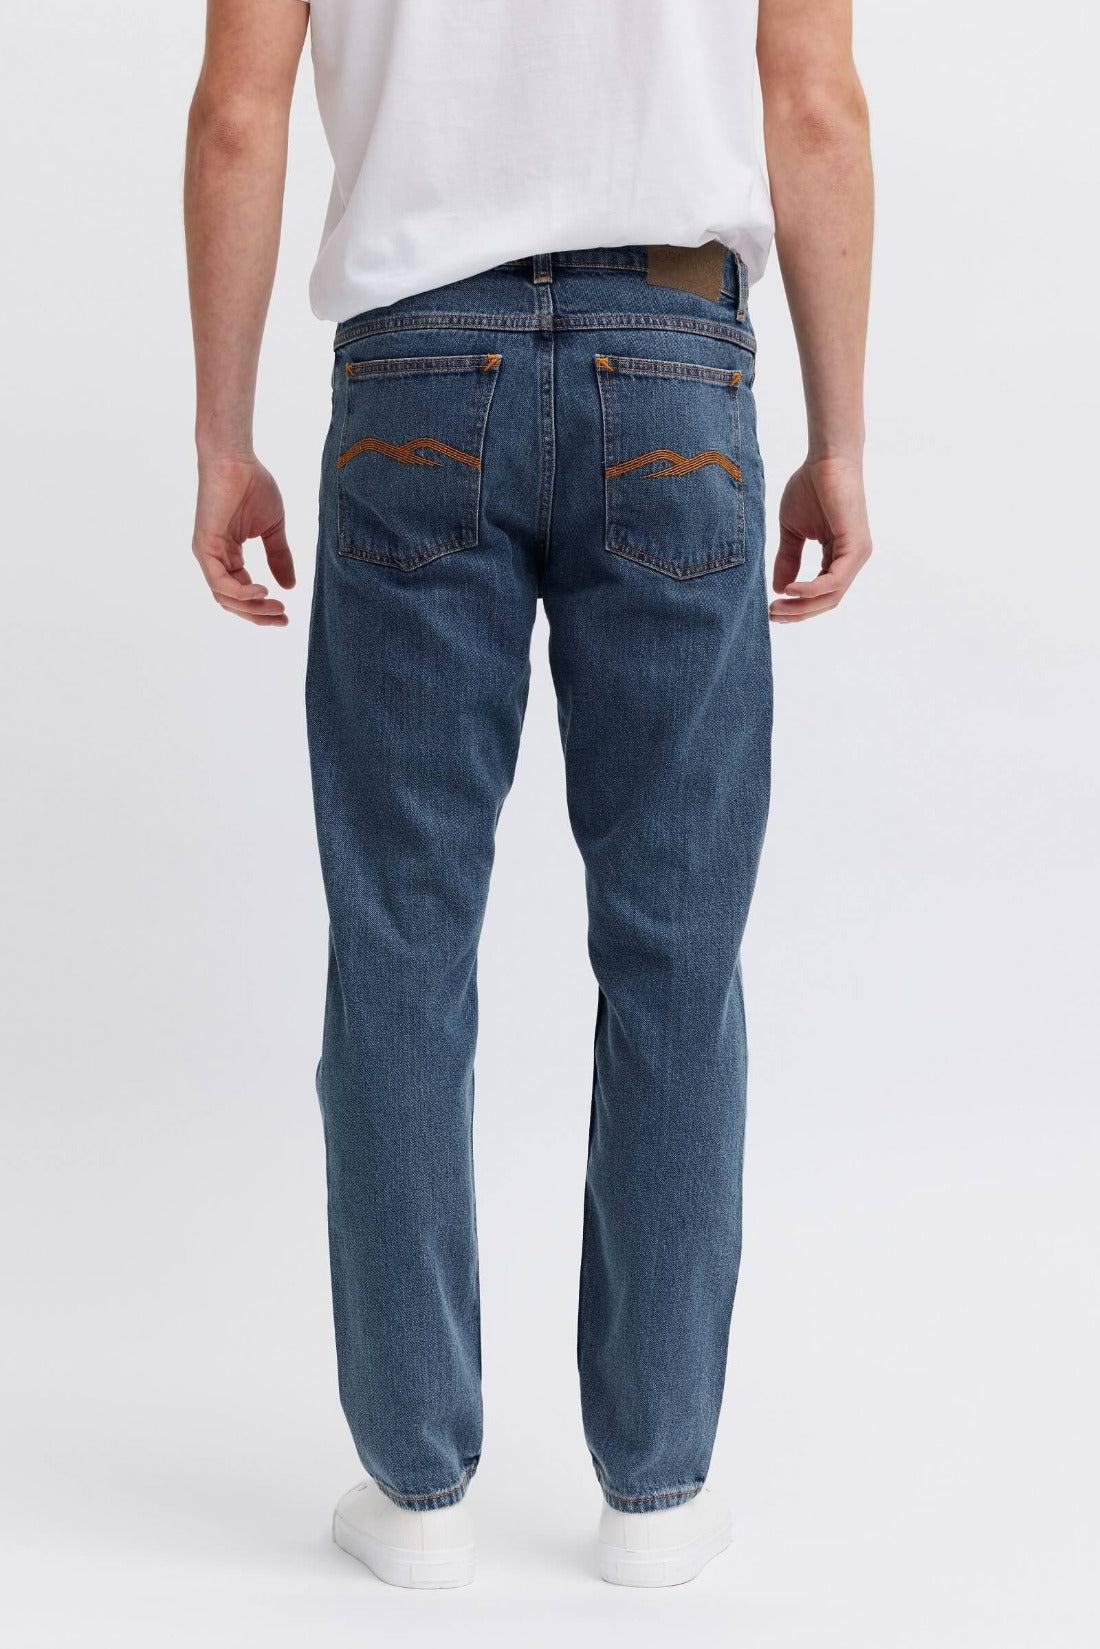 ethical and vegan male jeans. Stylish pockets and vegan patches